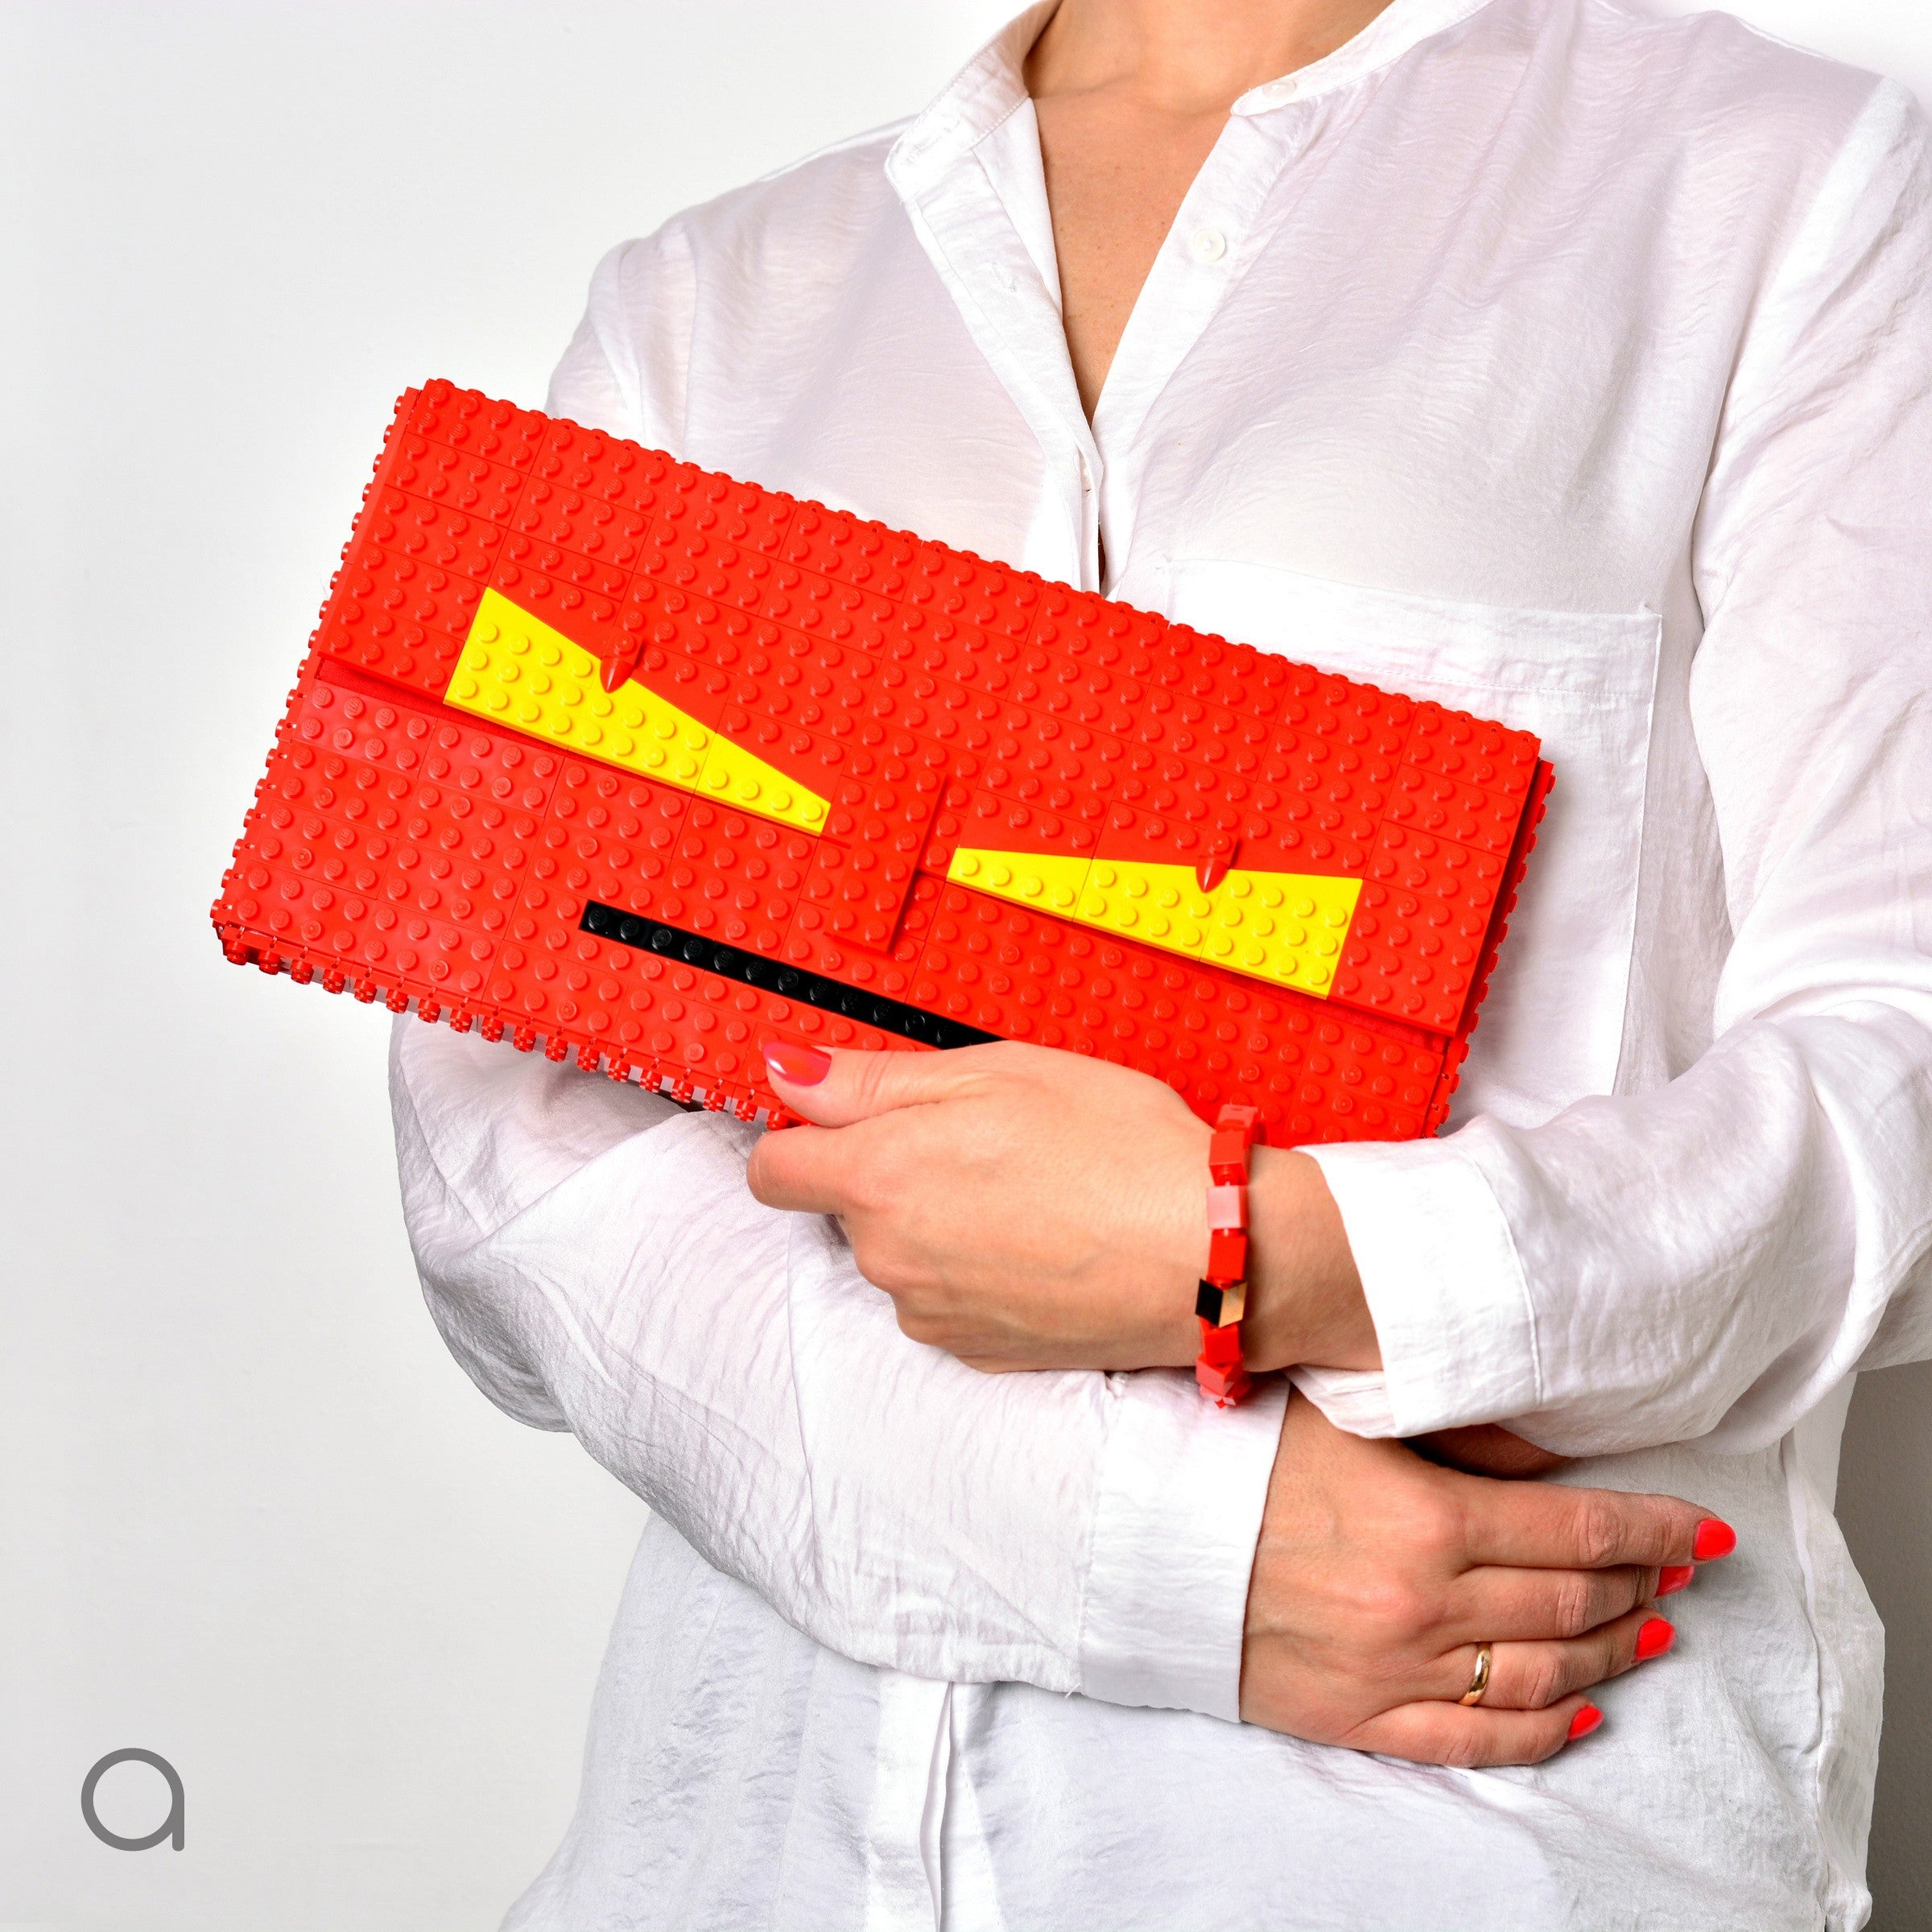 Red monster face oversize clutch